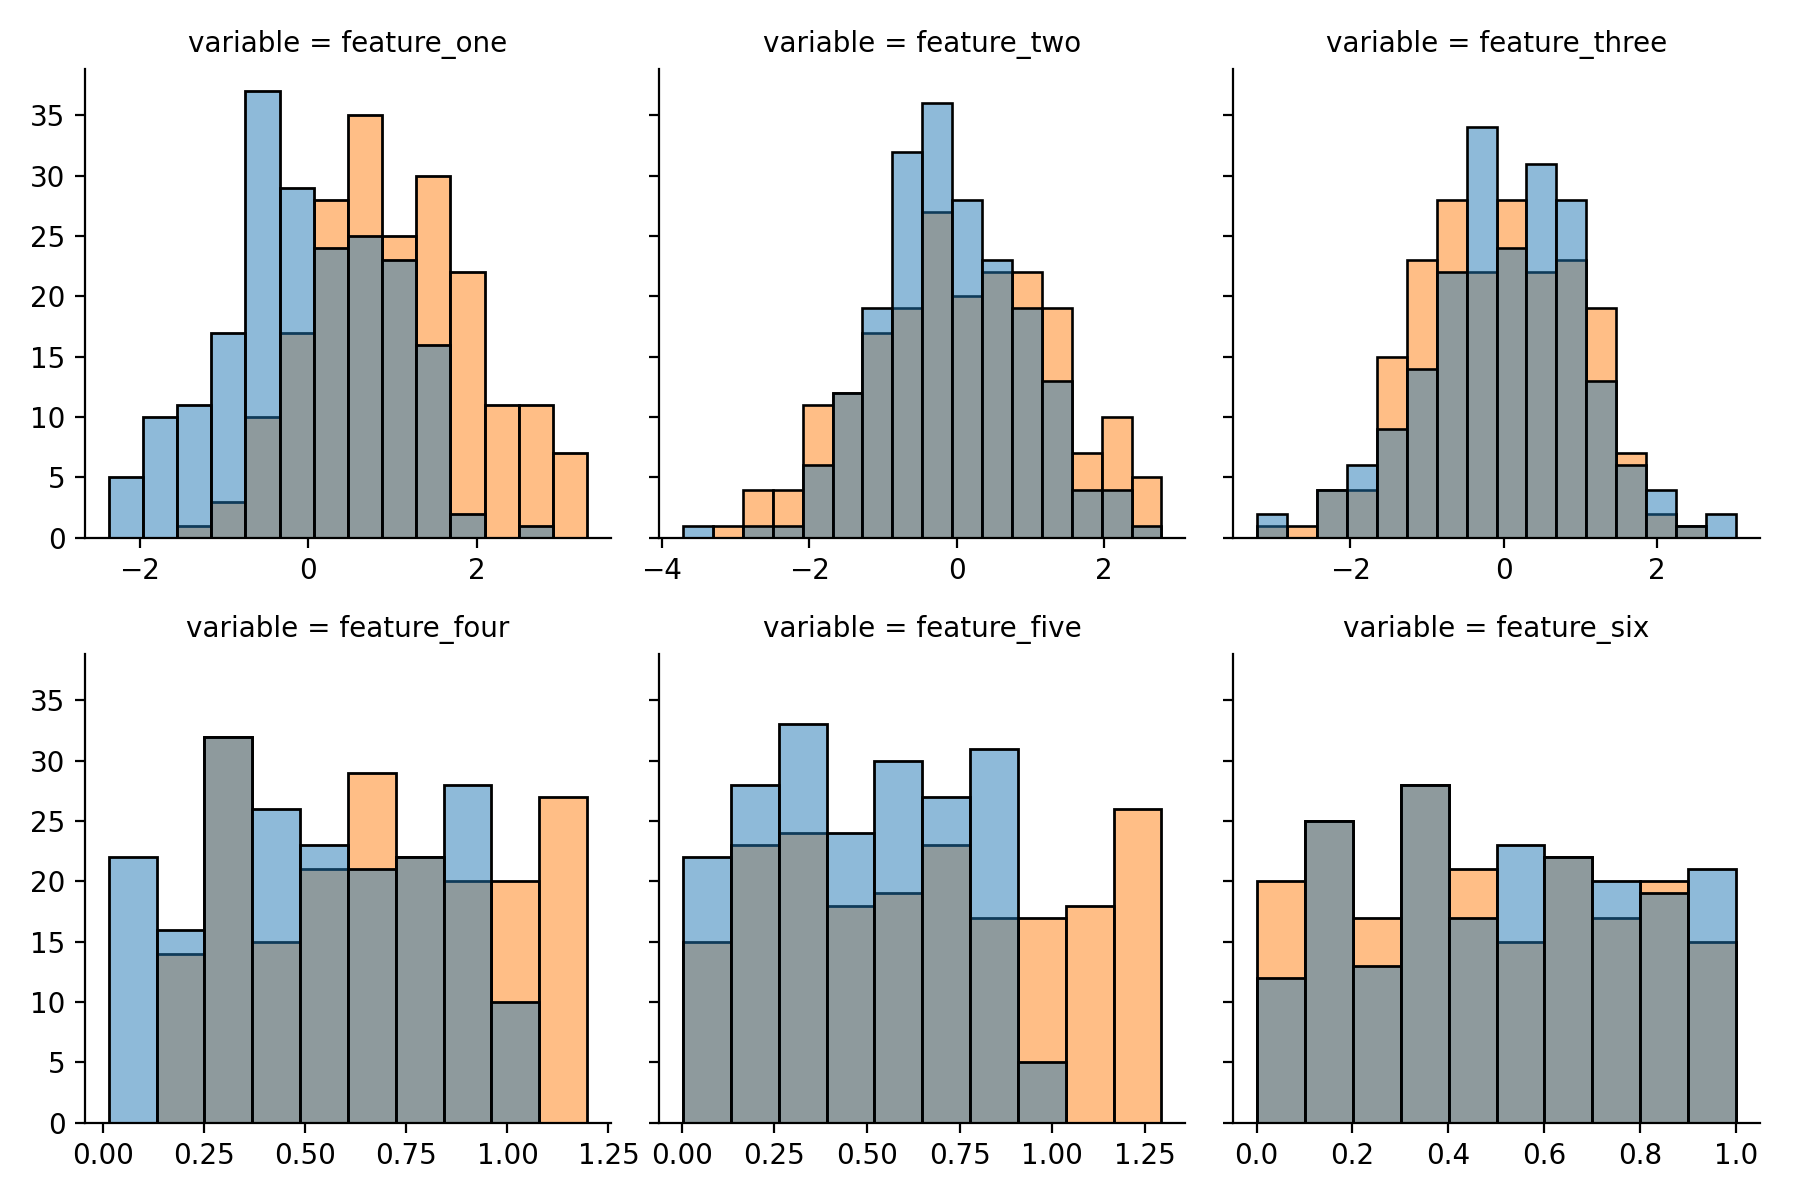 Distributions of the dataset with batch effects artifically introduced